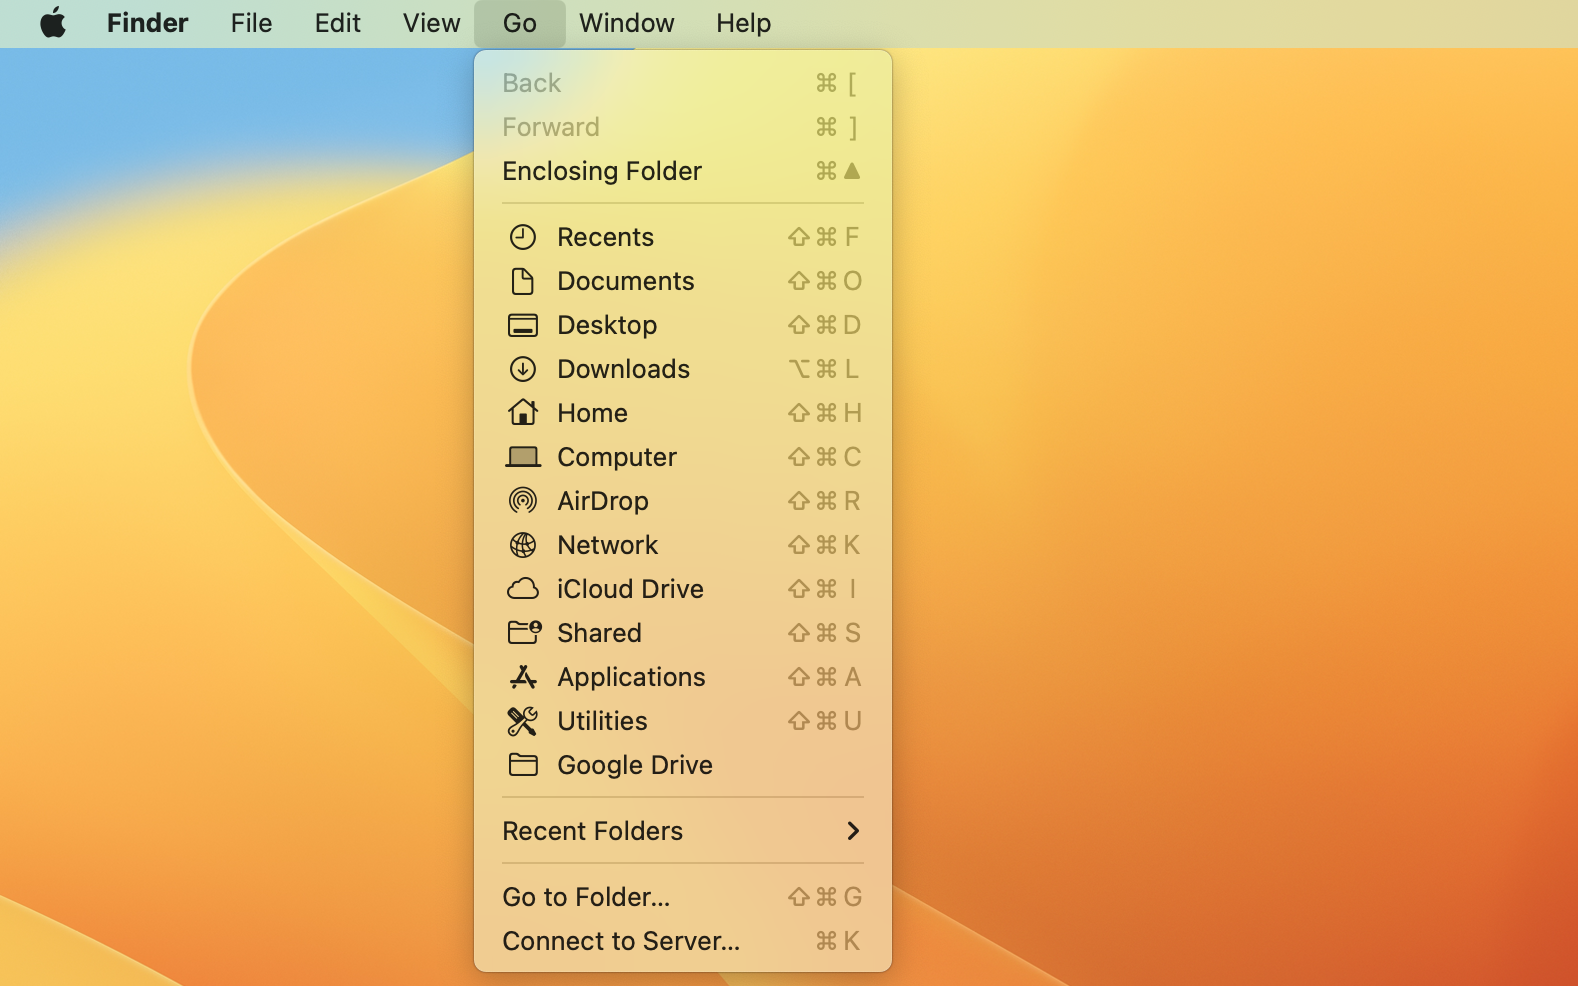  The finder interface.